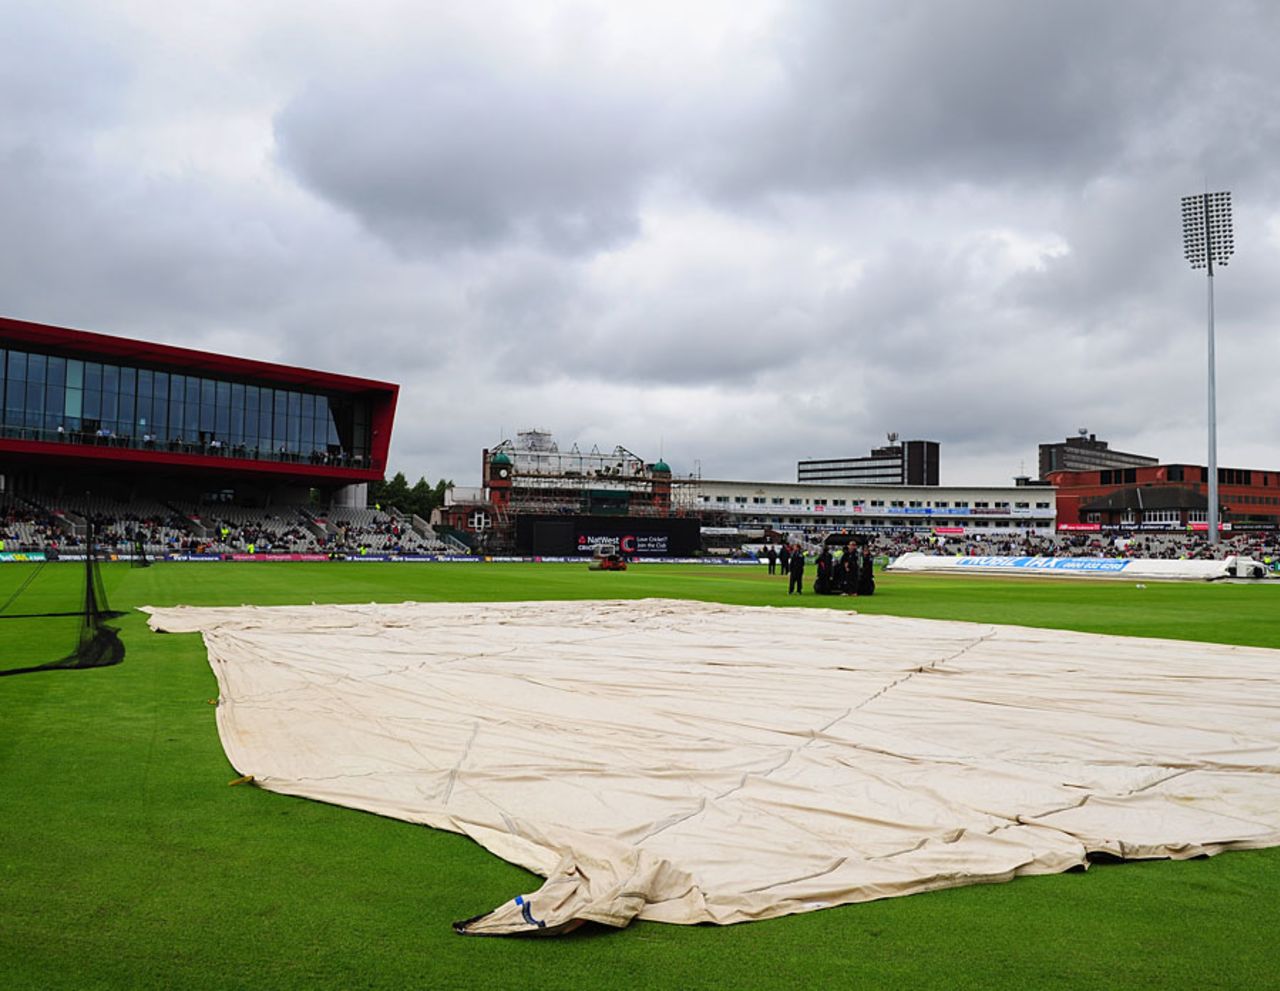 It was a damp start to the day in Manchester, England v Australia, 5th ODI, Old Trafford, July 10, 2012